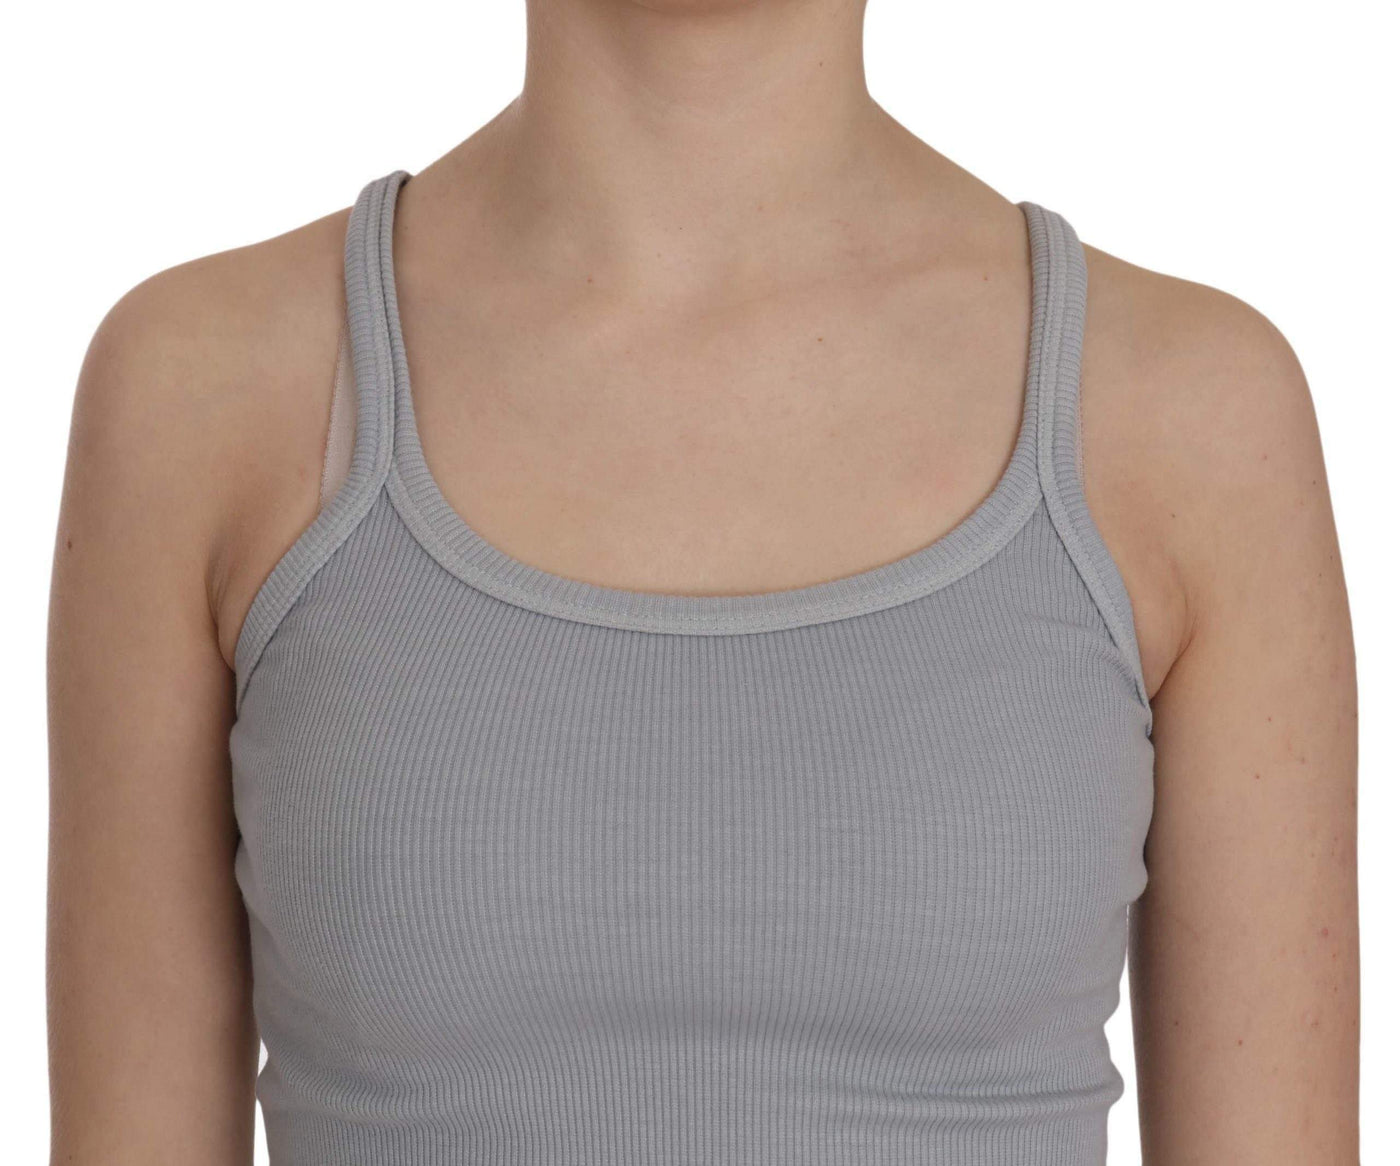 PINK MEMORIES Light  Sleeveless Spaghetti Strap Blouse #women, Catch, feed-agegroup-adult, feed-color-gray, feed-color-pink, feed-gender-female, feed-size-IT38|XS, feed-size-IT40|S, feed-size-IT42|M, feed-size-IT44|L, feed-size-IT46|XL, Gender_Women, Gray, IT38|XS, IT40|S, IT42|M, IT44|L, IT46|XL, Kogan, PINK MEMORIES, Tops & T-Shirts - Women - Clothing, Women - New Arrivals at SEYMAYKA